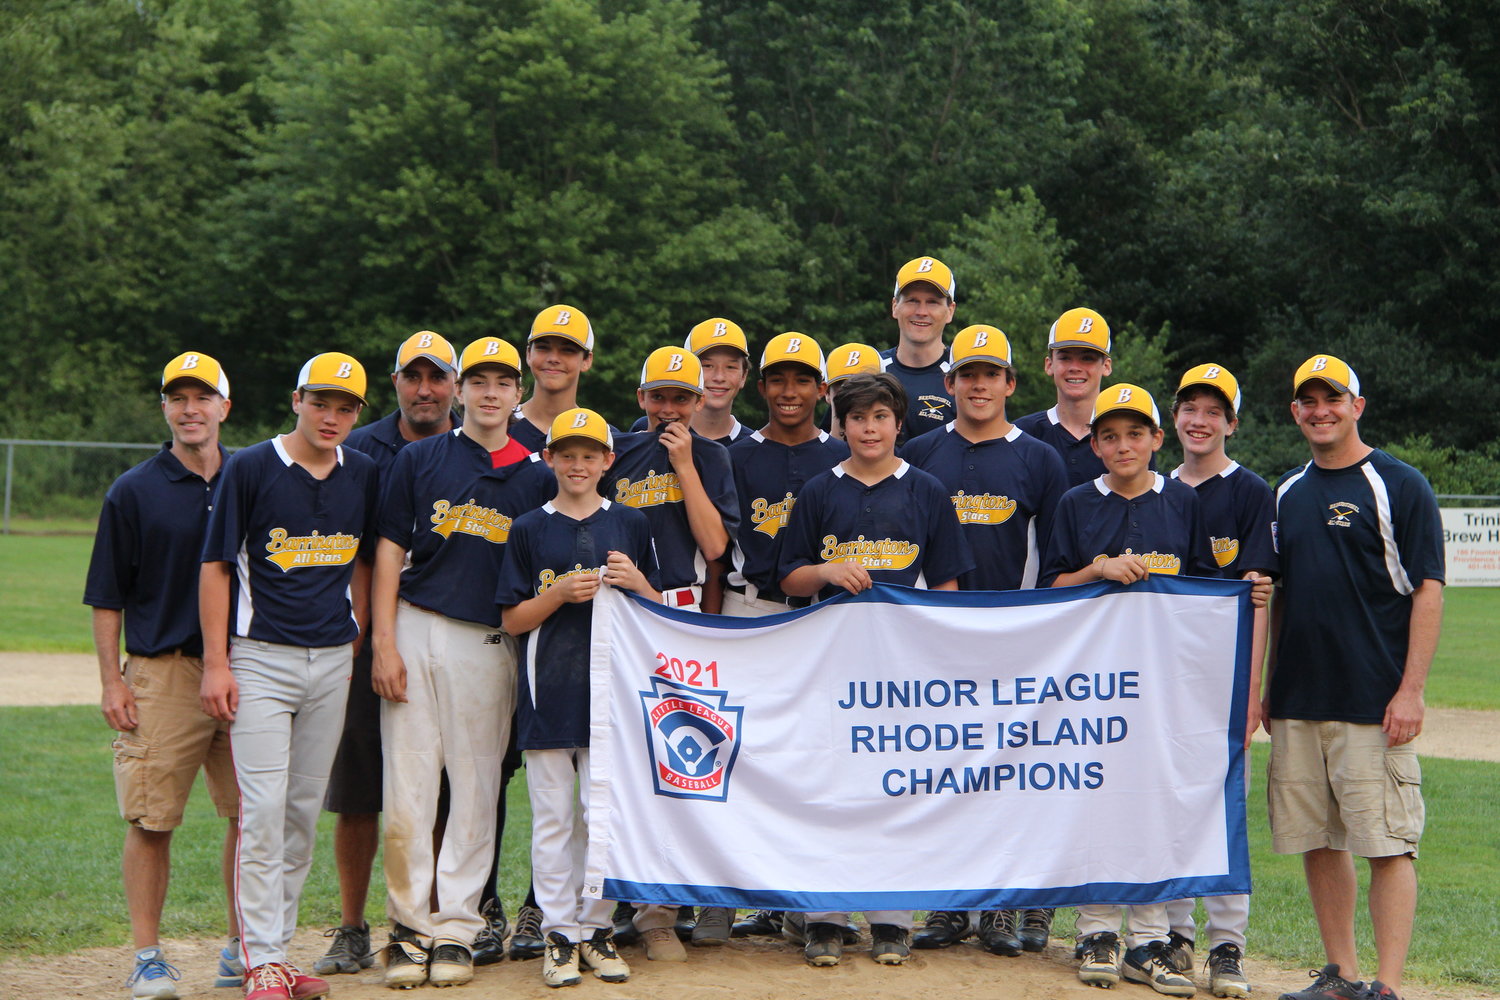 Members of the Barrington Little League Junior Division All-Star team pose for a photo after winning the state championship on Sunday. Barrington defeated South Kingstown, 5-1, in the finals.